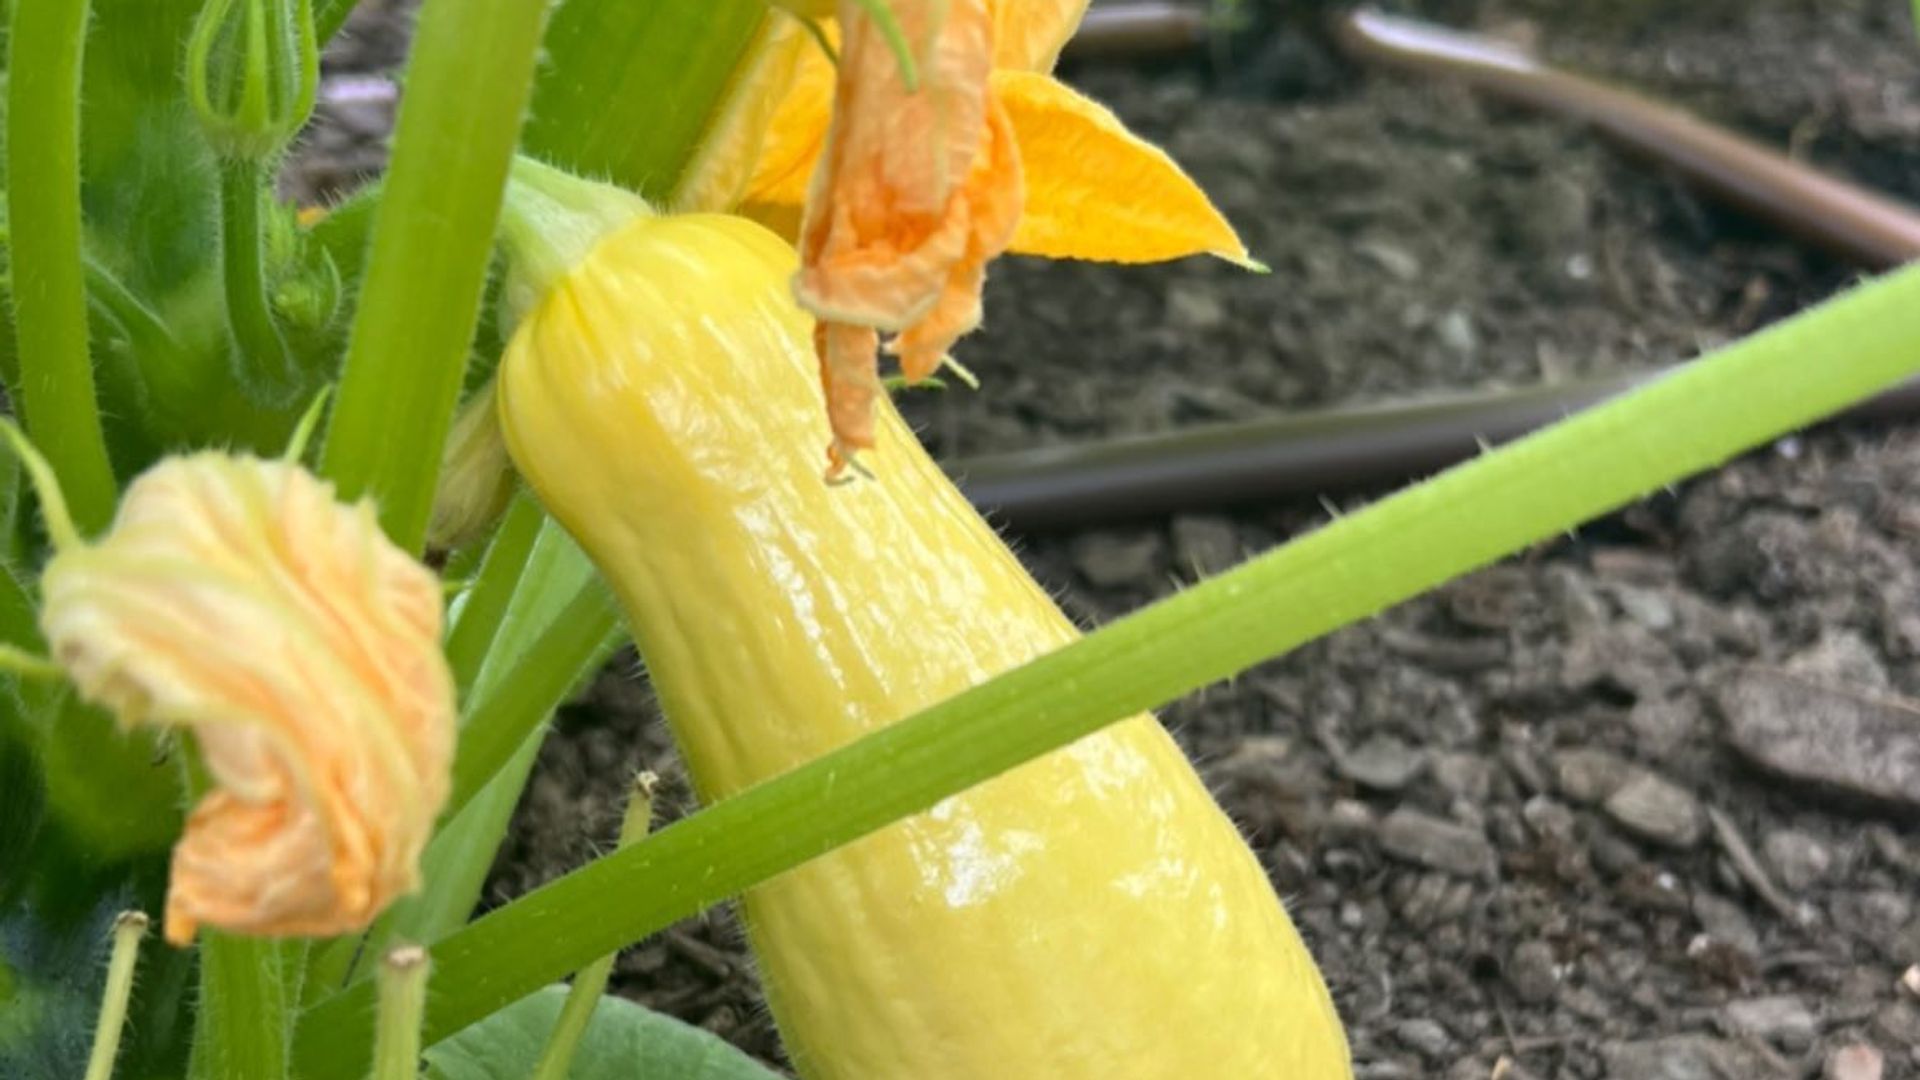 A photo of a zucchini plant with flowers and a young zucchini growing